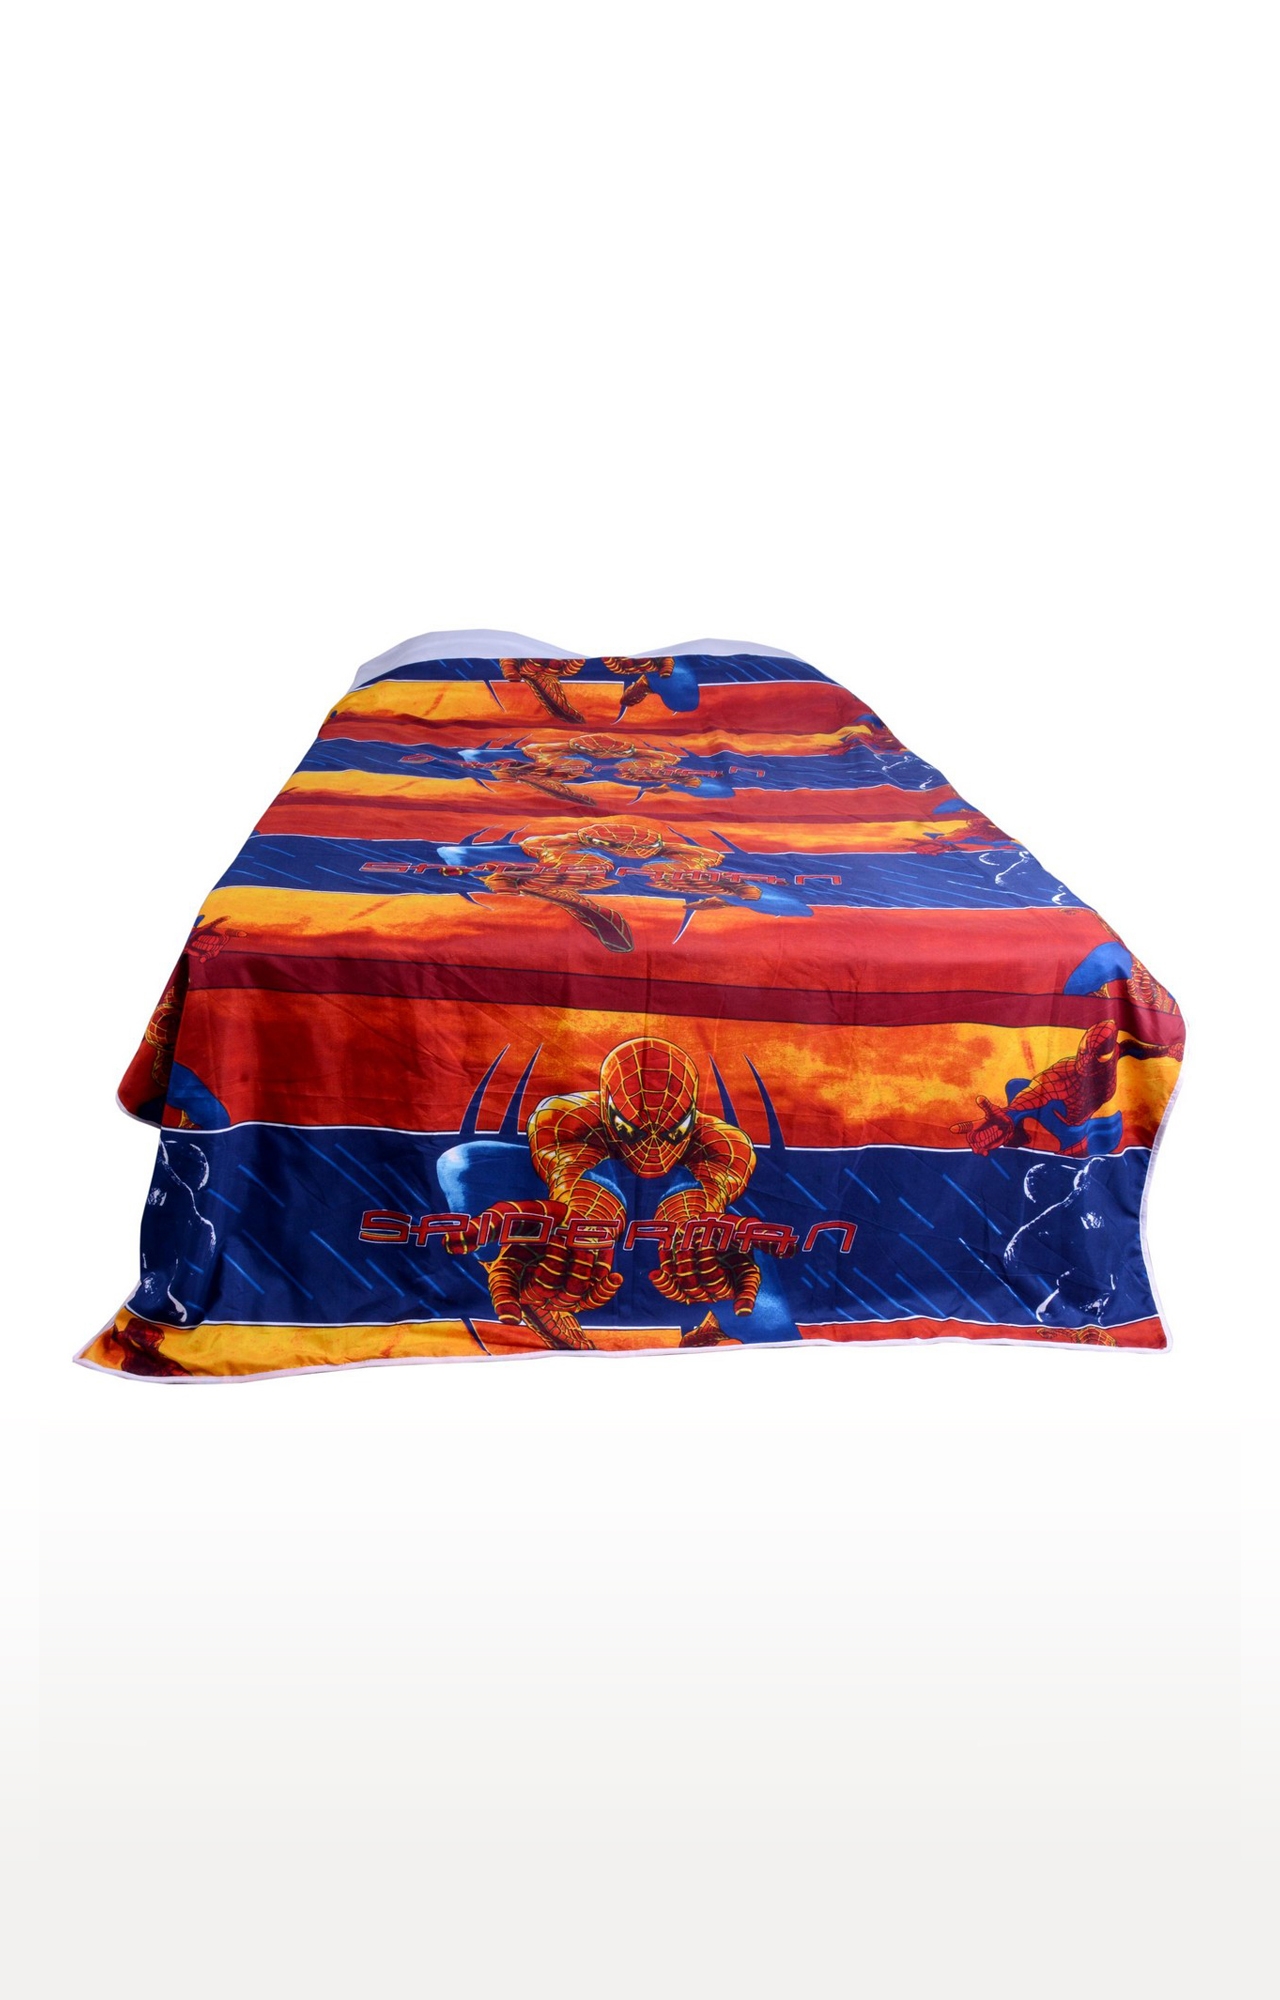 Spiderman Printed Cotton 3 Layer Single Bed Quilt Dohar